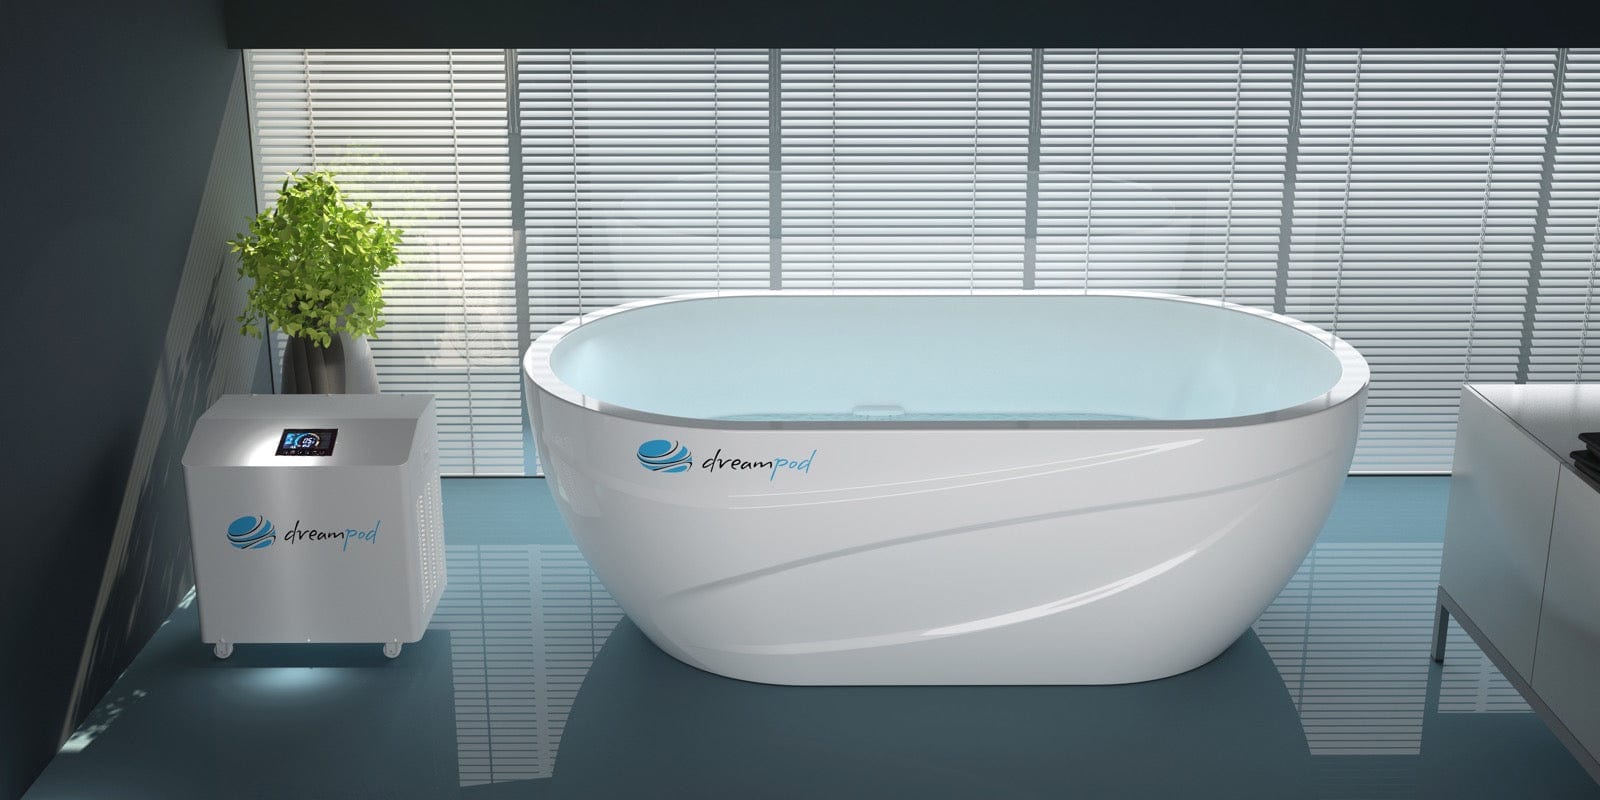 The Dreampod Ice Bath - The Cold Plunge Store